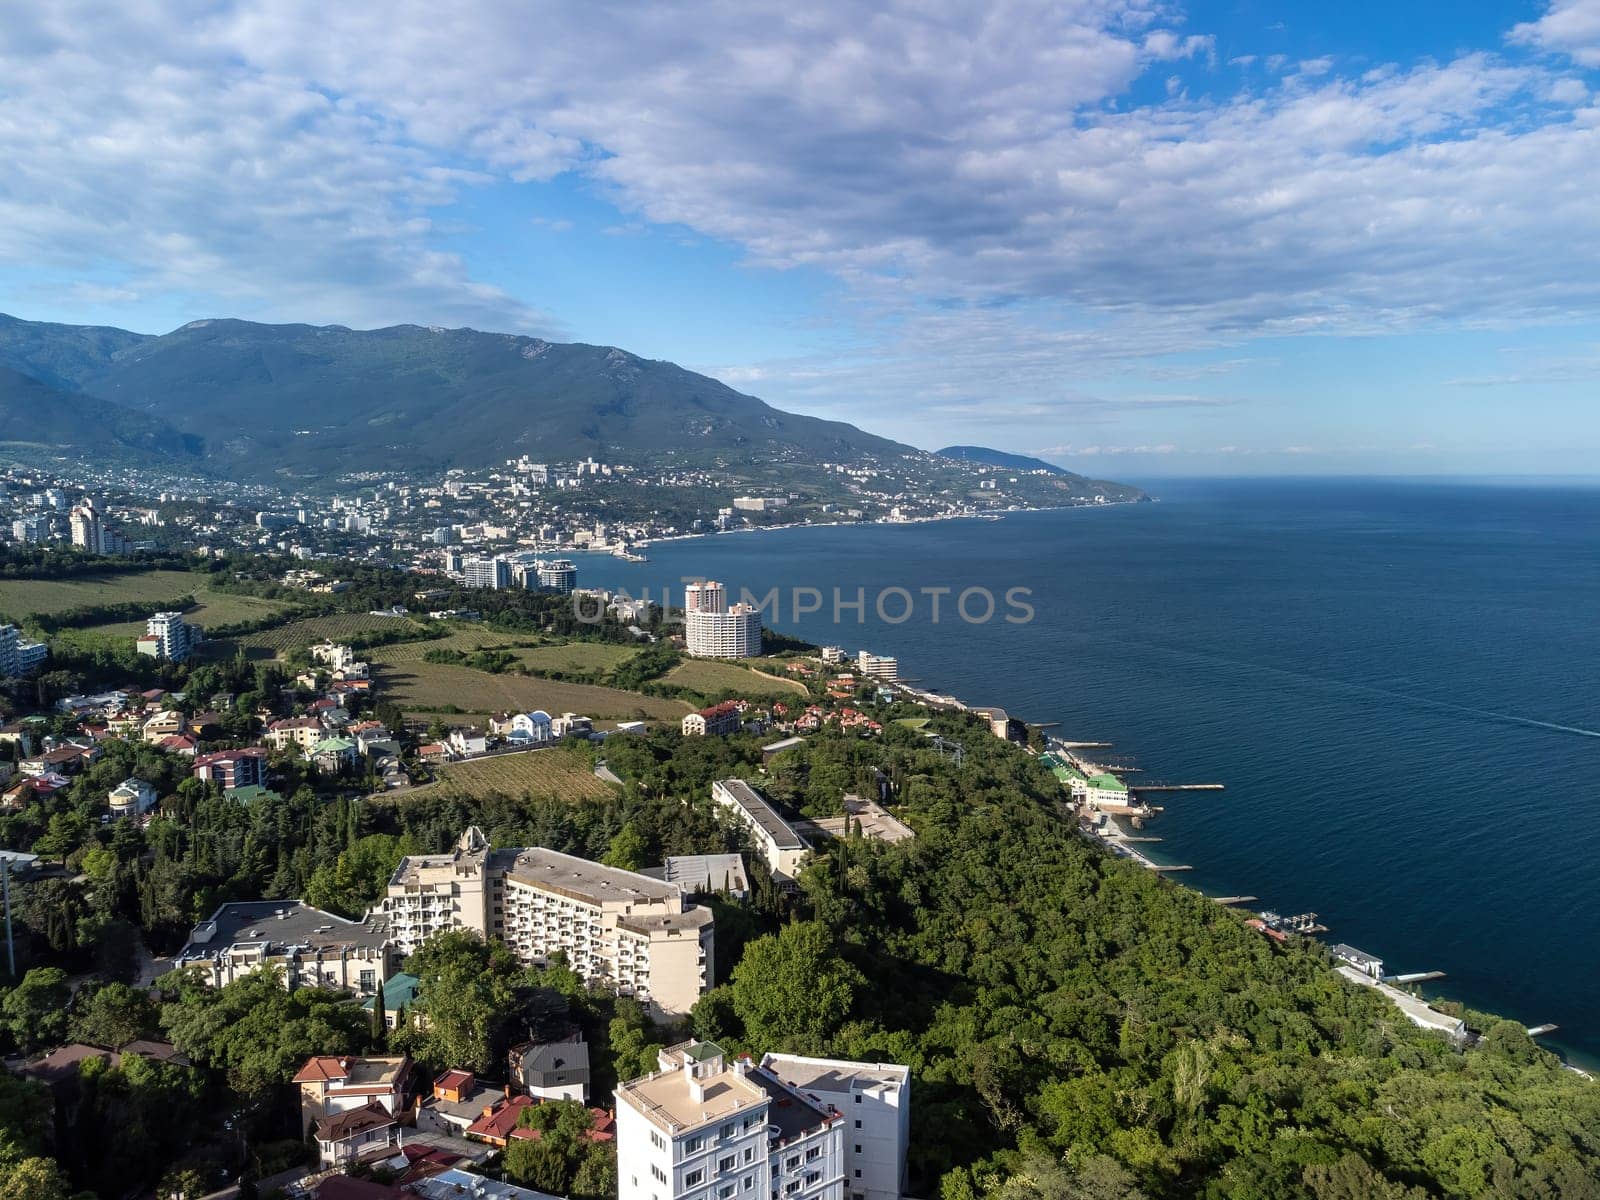 Aerial View of Livadia Palace - located on the shores of the Black Sea in the village of Livadia in the Yalta region of Crimea. Livadia Palace was a summer retreat of the last Russian tsar Nicholas II by panophotograph